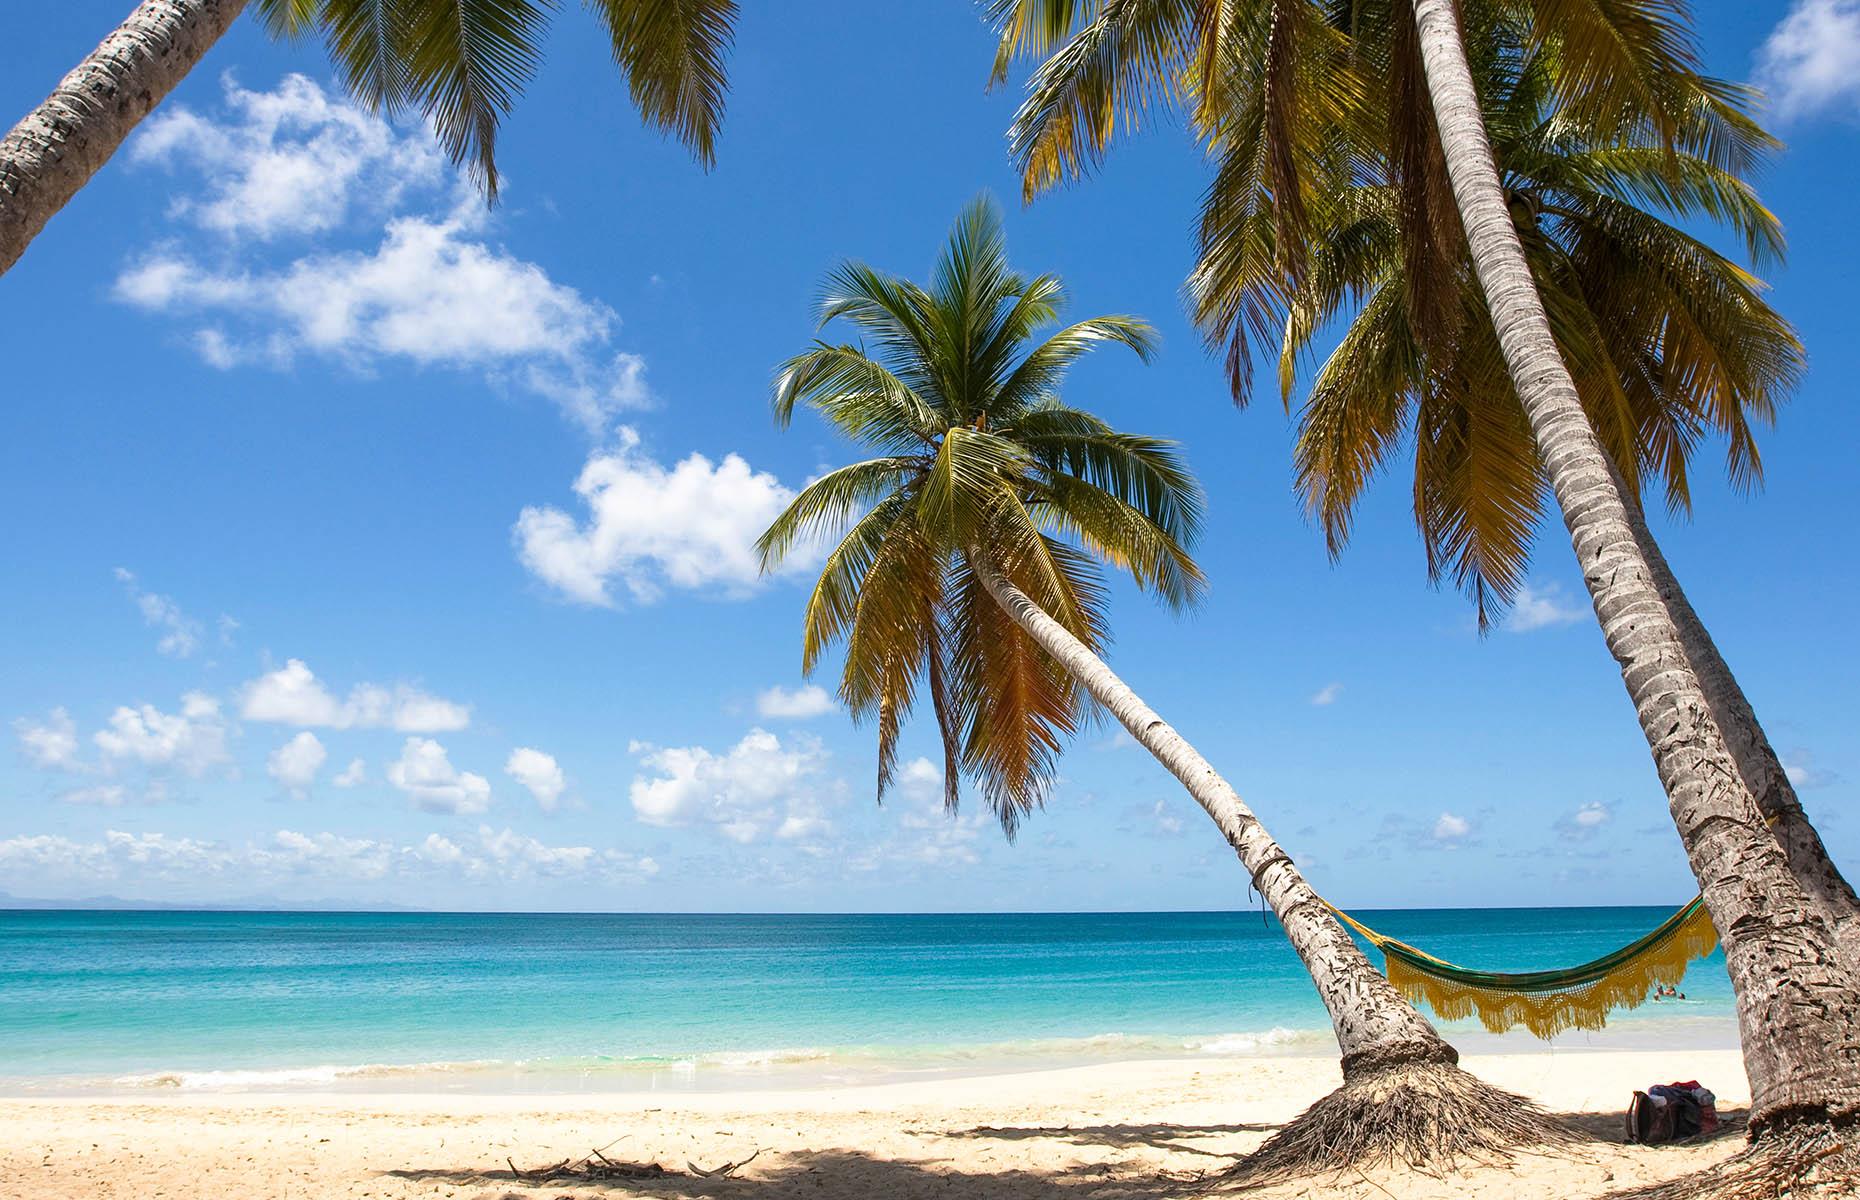 <p>A long strip of white sand, lined with coconut trees bowing respectfully towards an impossibly turquoise sea, Plage des Salines near St Anne on Martinique is the Caribbean beach you’ve always imagined. It’s popular, of course, but with close to 4,000 feet (1,200m) of powder-soft beachfront to choose from, it’s not hard to find your little piece of paradise. There are some small lolos (restaurants) selling snacks, but those in the know bring their own lunch to enjoy a picnic at one of the tables placed strategically at the back of the beach, in the shade.</p>  <p><a href="https://www.loveexploring.com/galleries/69354/50-experiences-you-didnt-know-you-could-have-in-the-caribbean?page=1"><strong>Read on for more exciting experiences to enjoy in the Caribbean</strong></a></p>